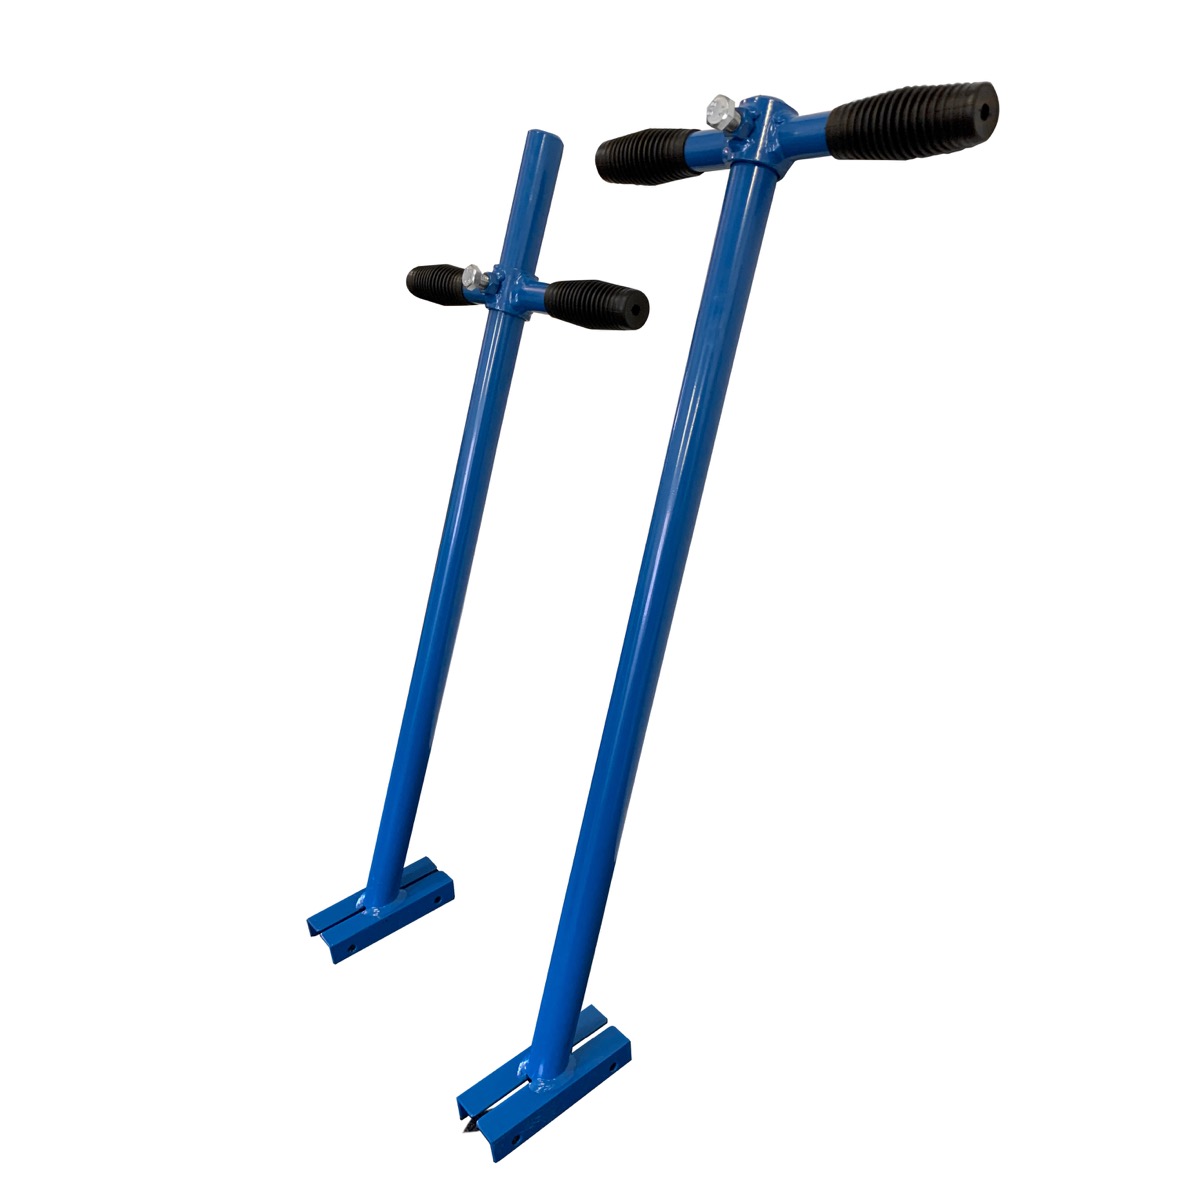 Tamp Beams are used to level concrete, this job is made easier with these adjustable handles which have a simple locking device allowing the handles to be set at a preferred height. Available from Speedcrete, United Kingdom.